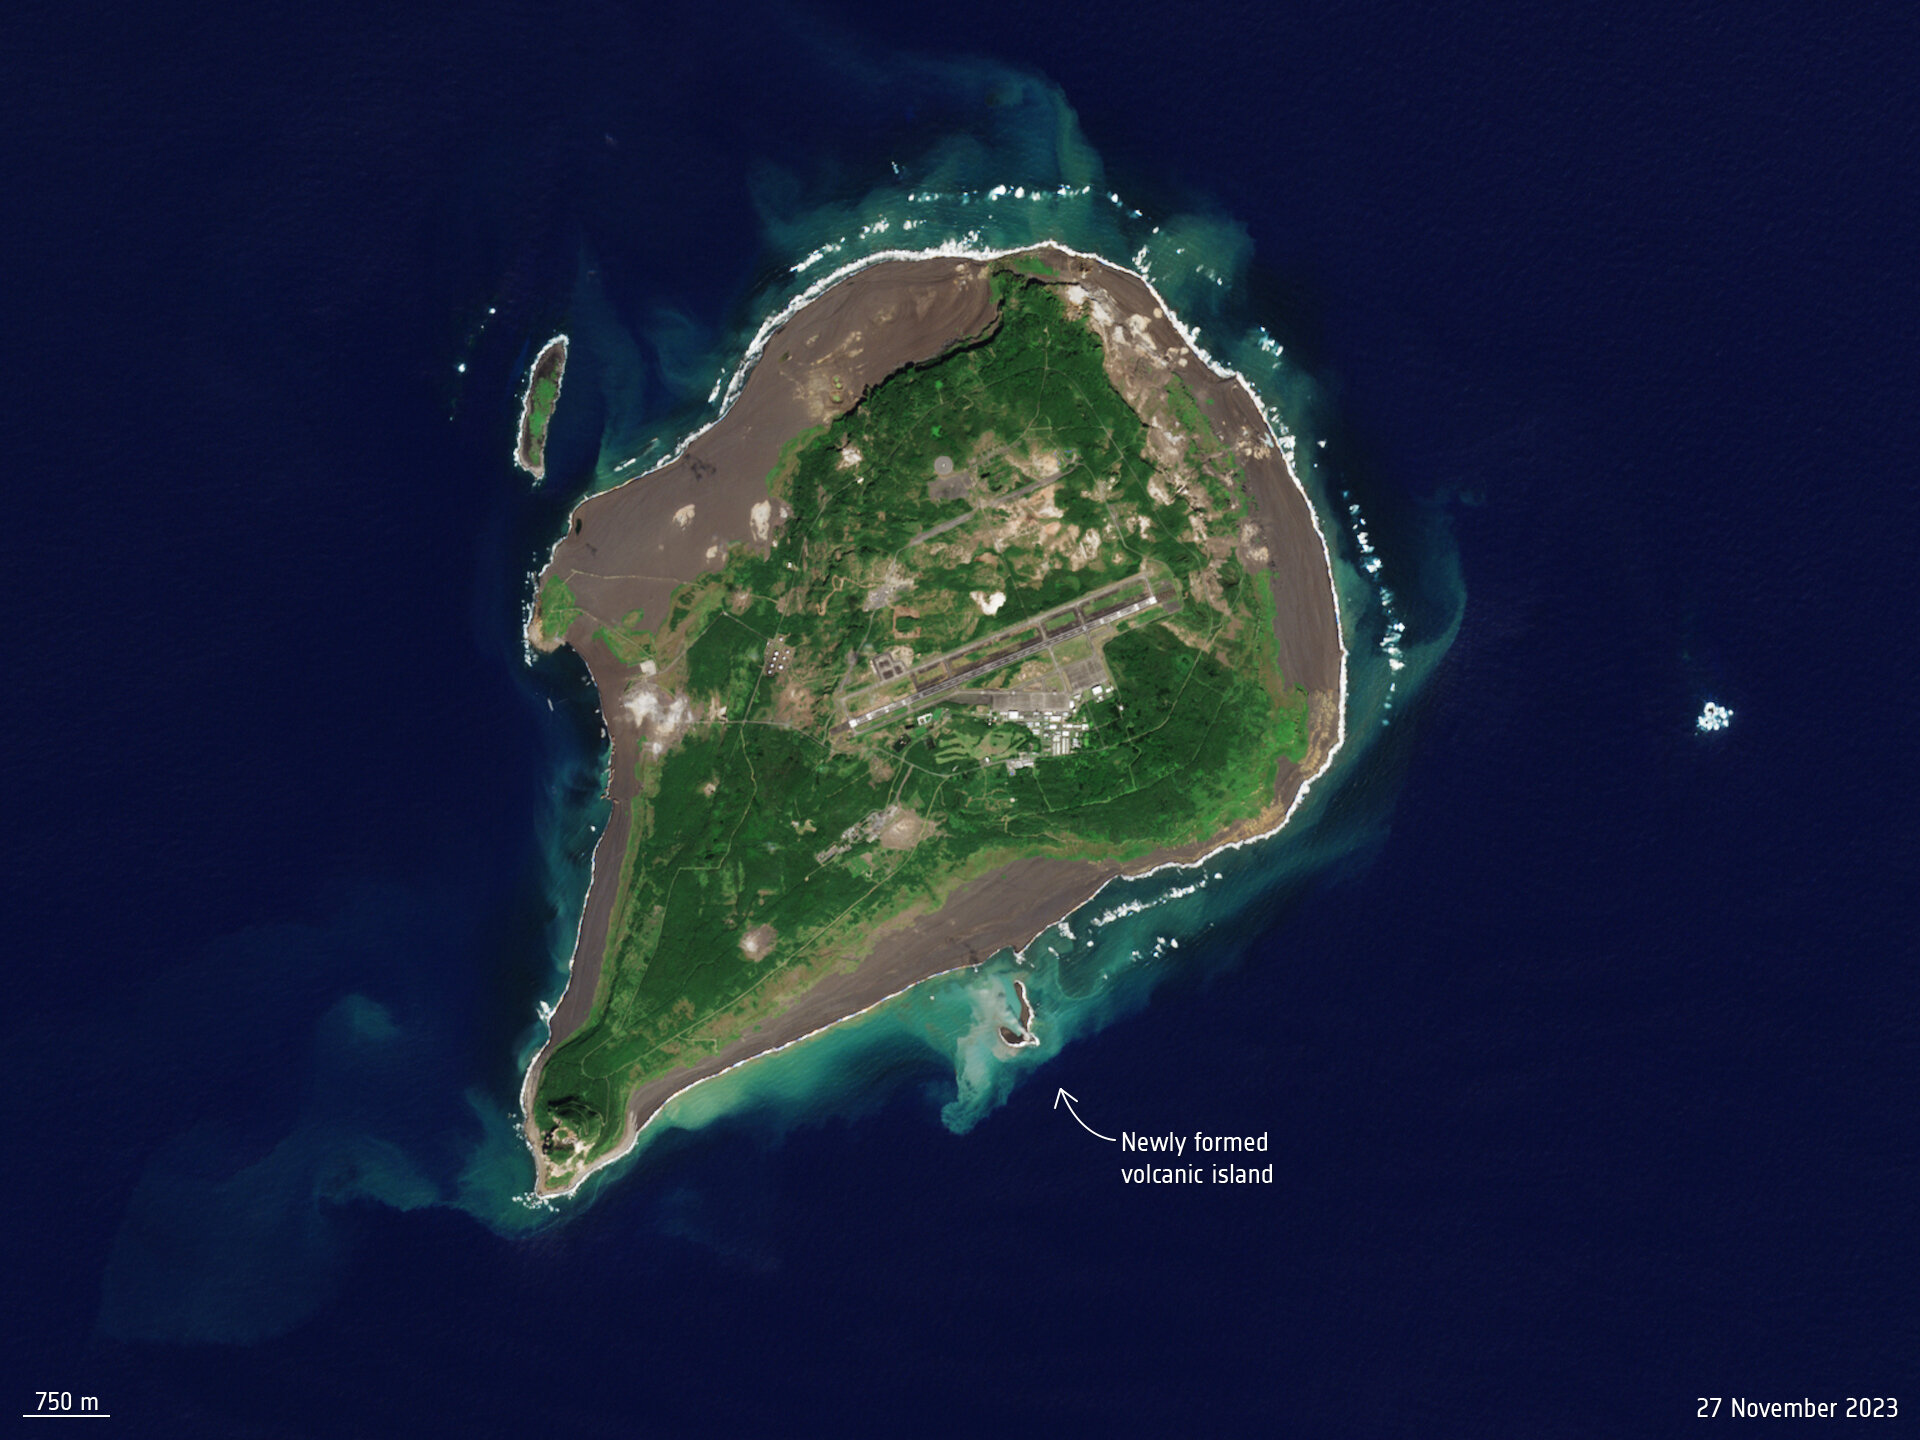 a satellite view of a large island with a smaller island forming off of its coast